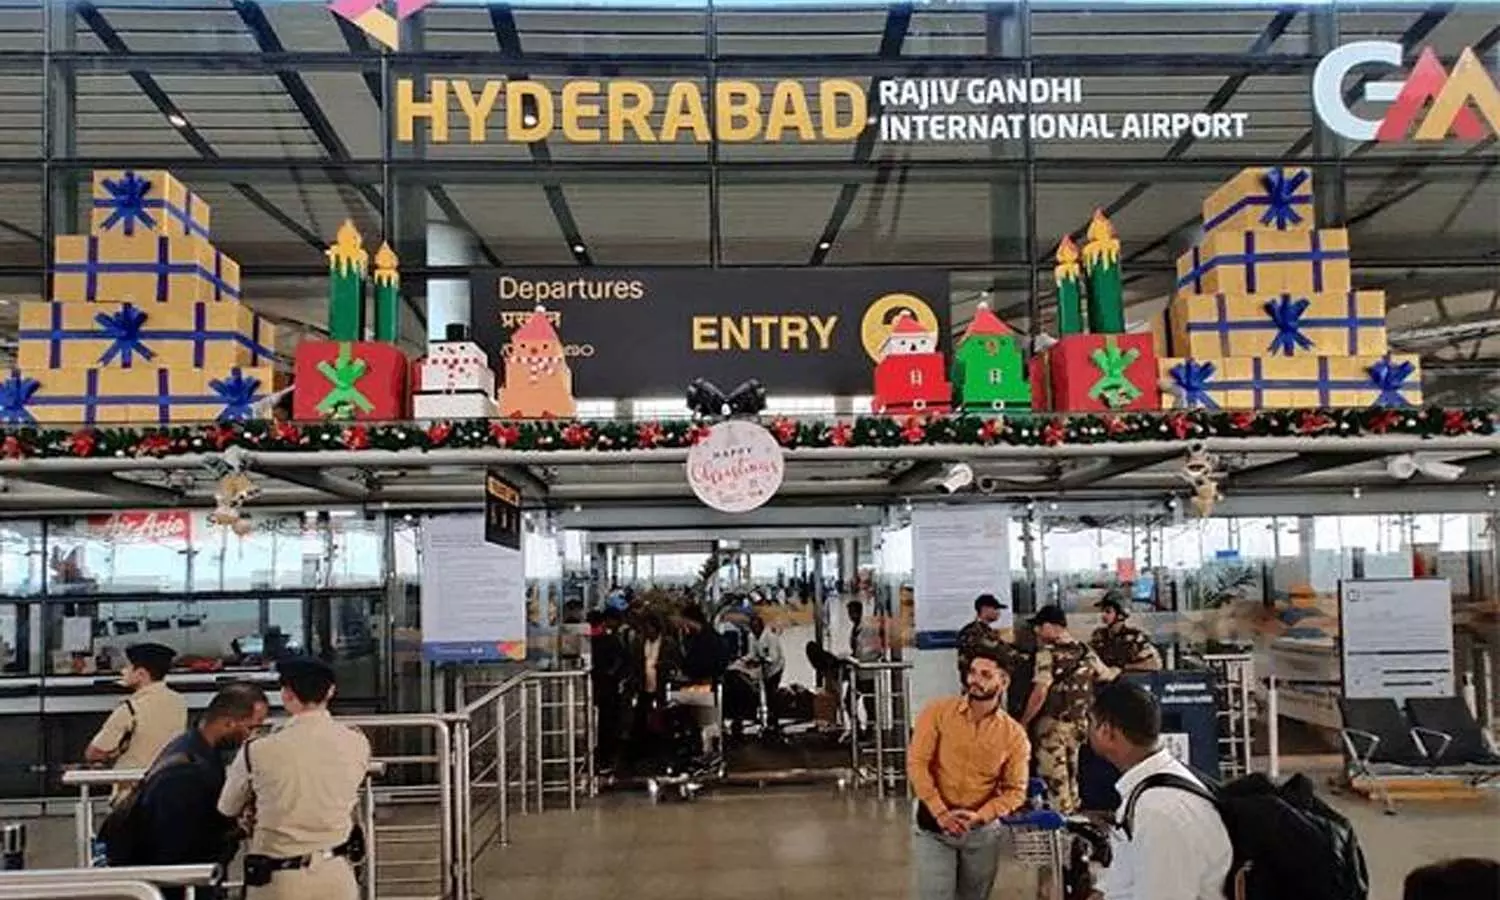 Hyderabad: Big action of DRI, cocaine worth 80 crores seized from Hyderabad airport